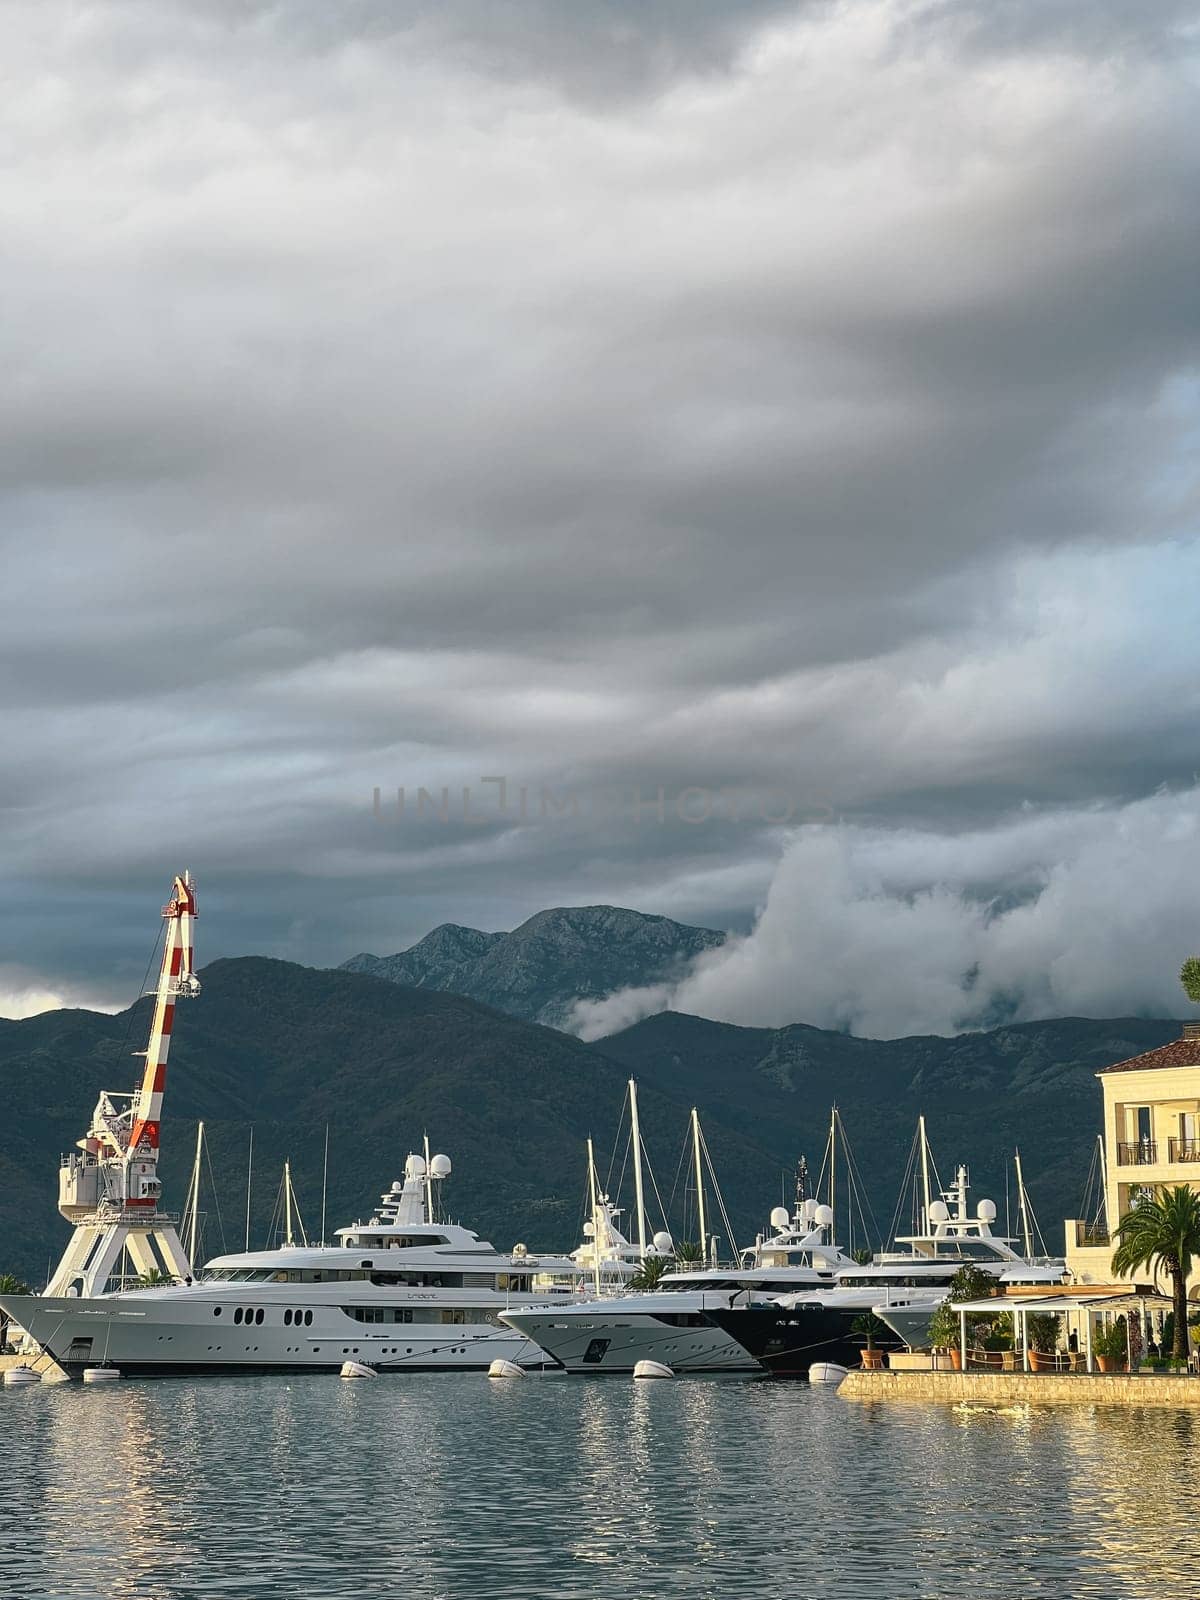 Yachts stand at the mooring of the marina against the backdrop of mountains in the fog by Nadtochiy